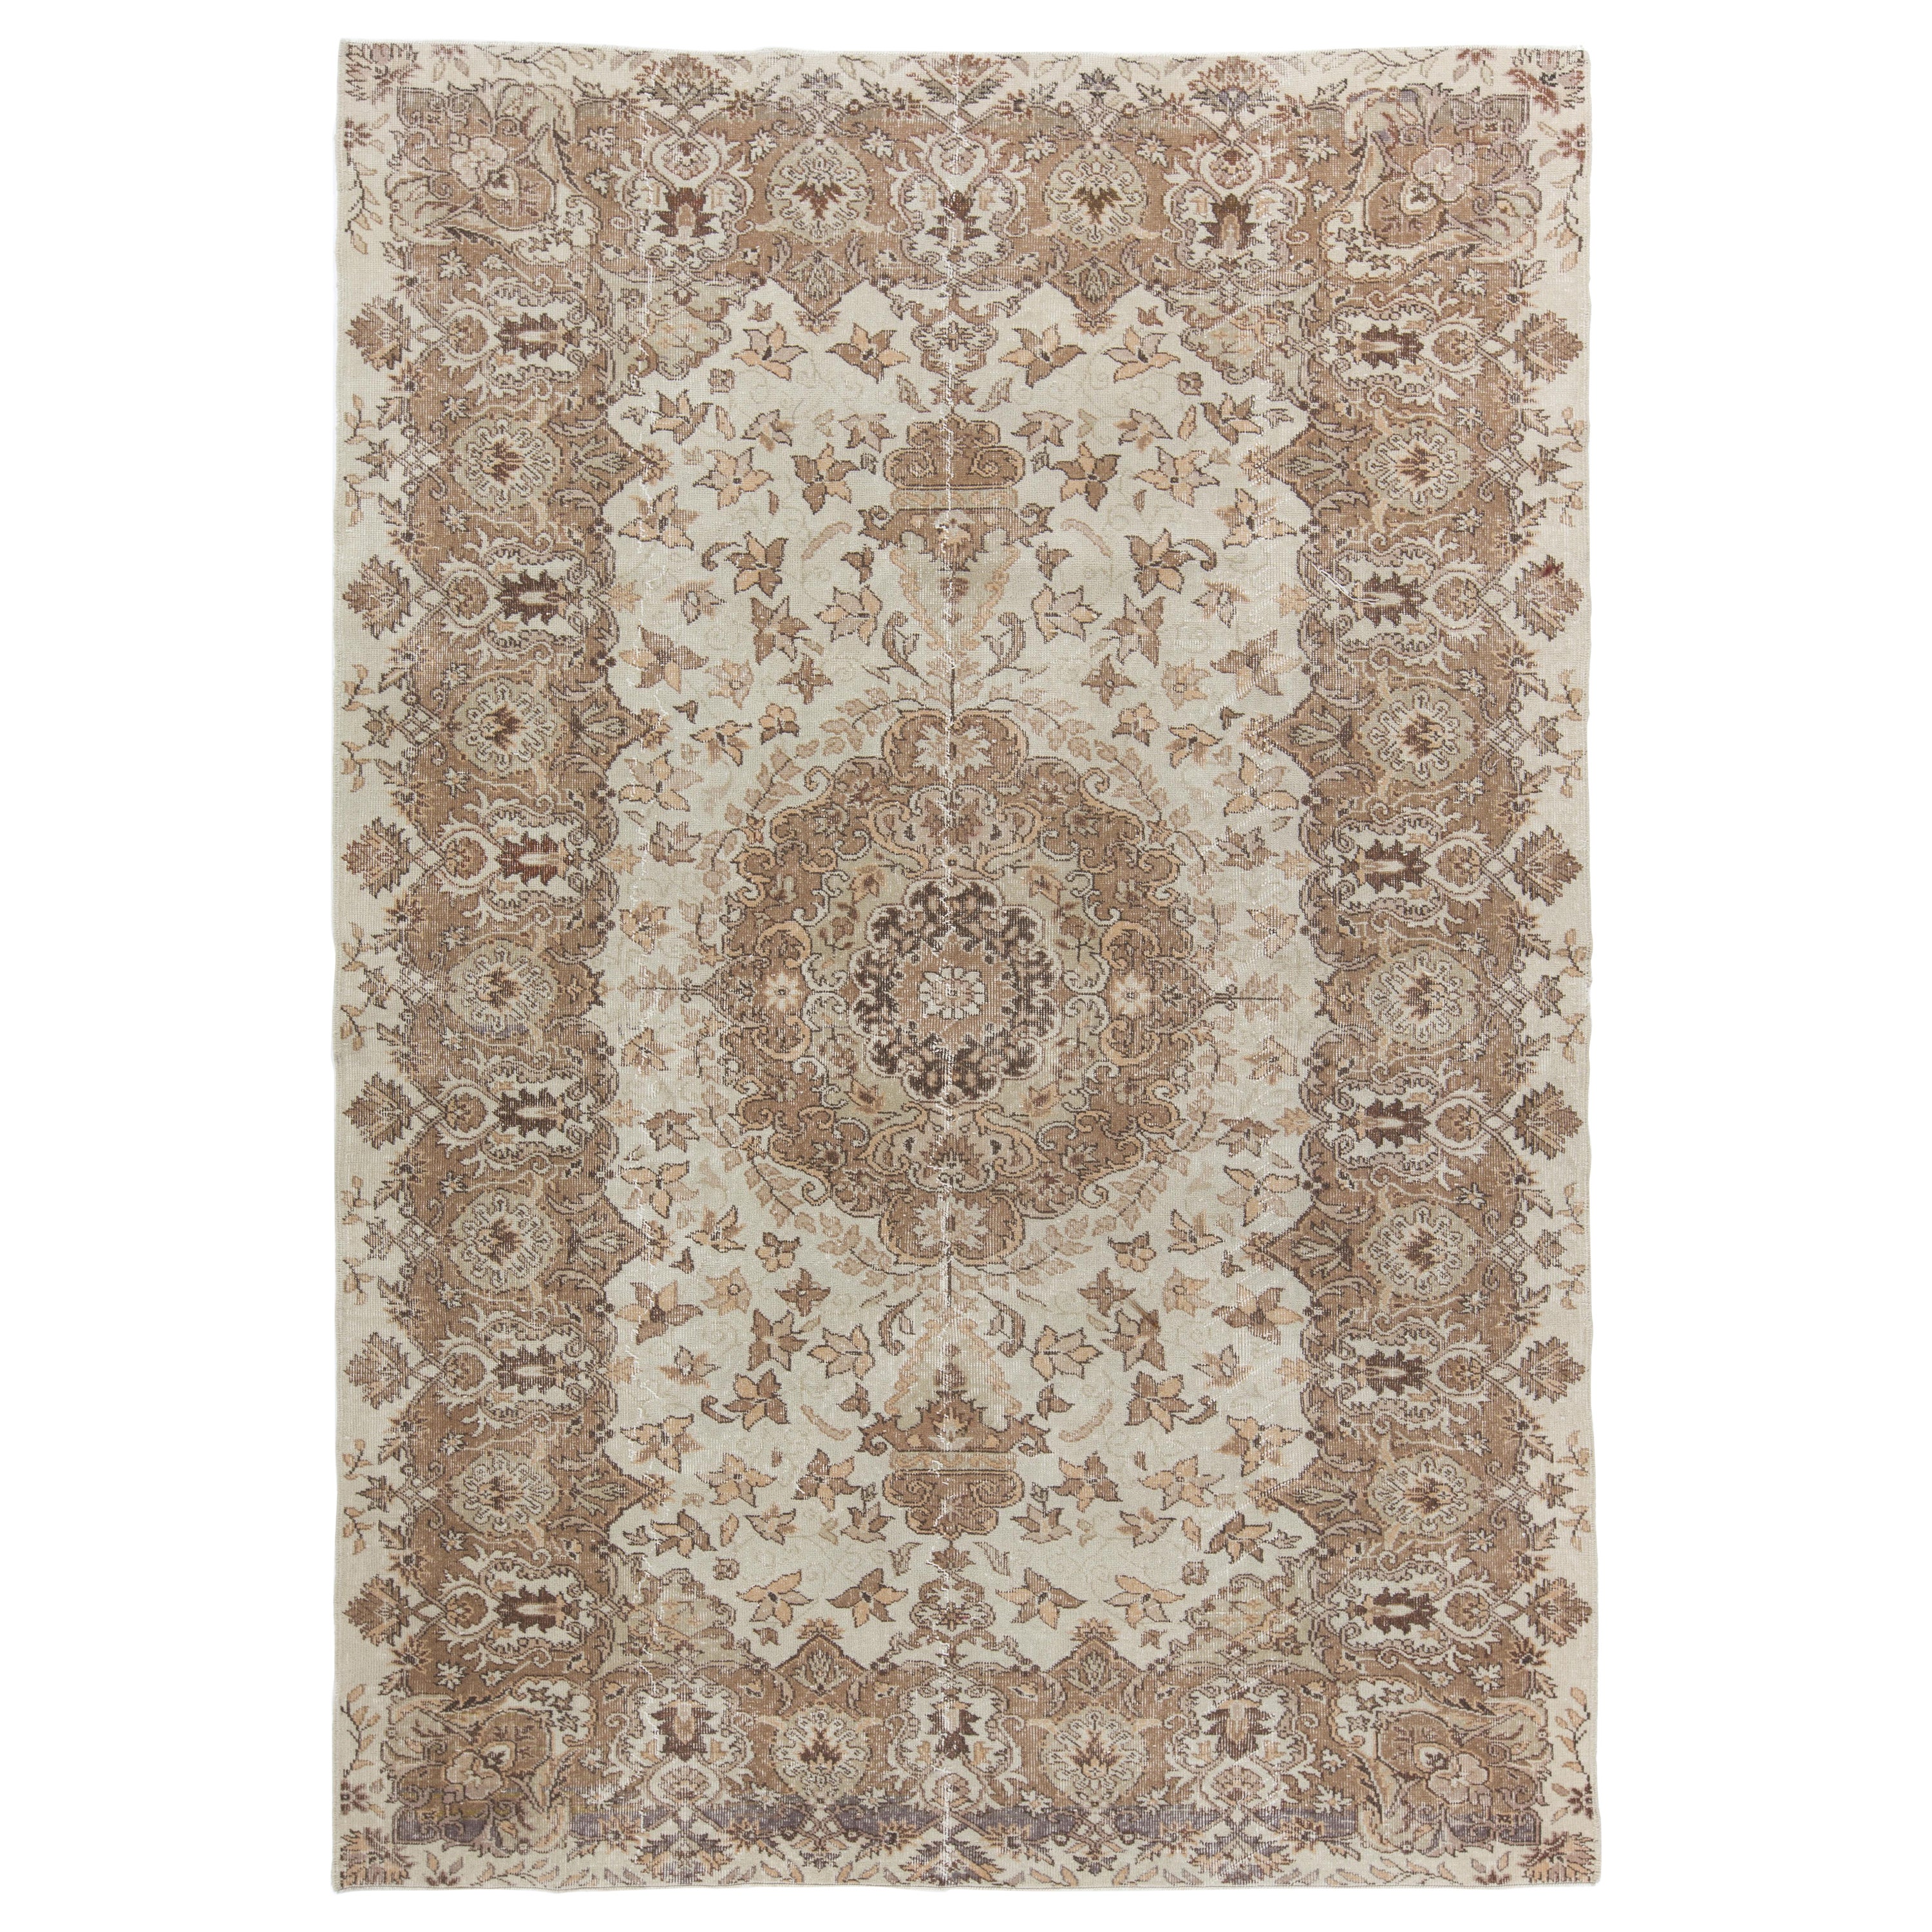 7.3x10.5 Ft Mid-20th Century Handmade Shabby Chic Turkish Wool Area Rug in Beige For Sale